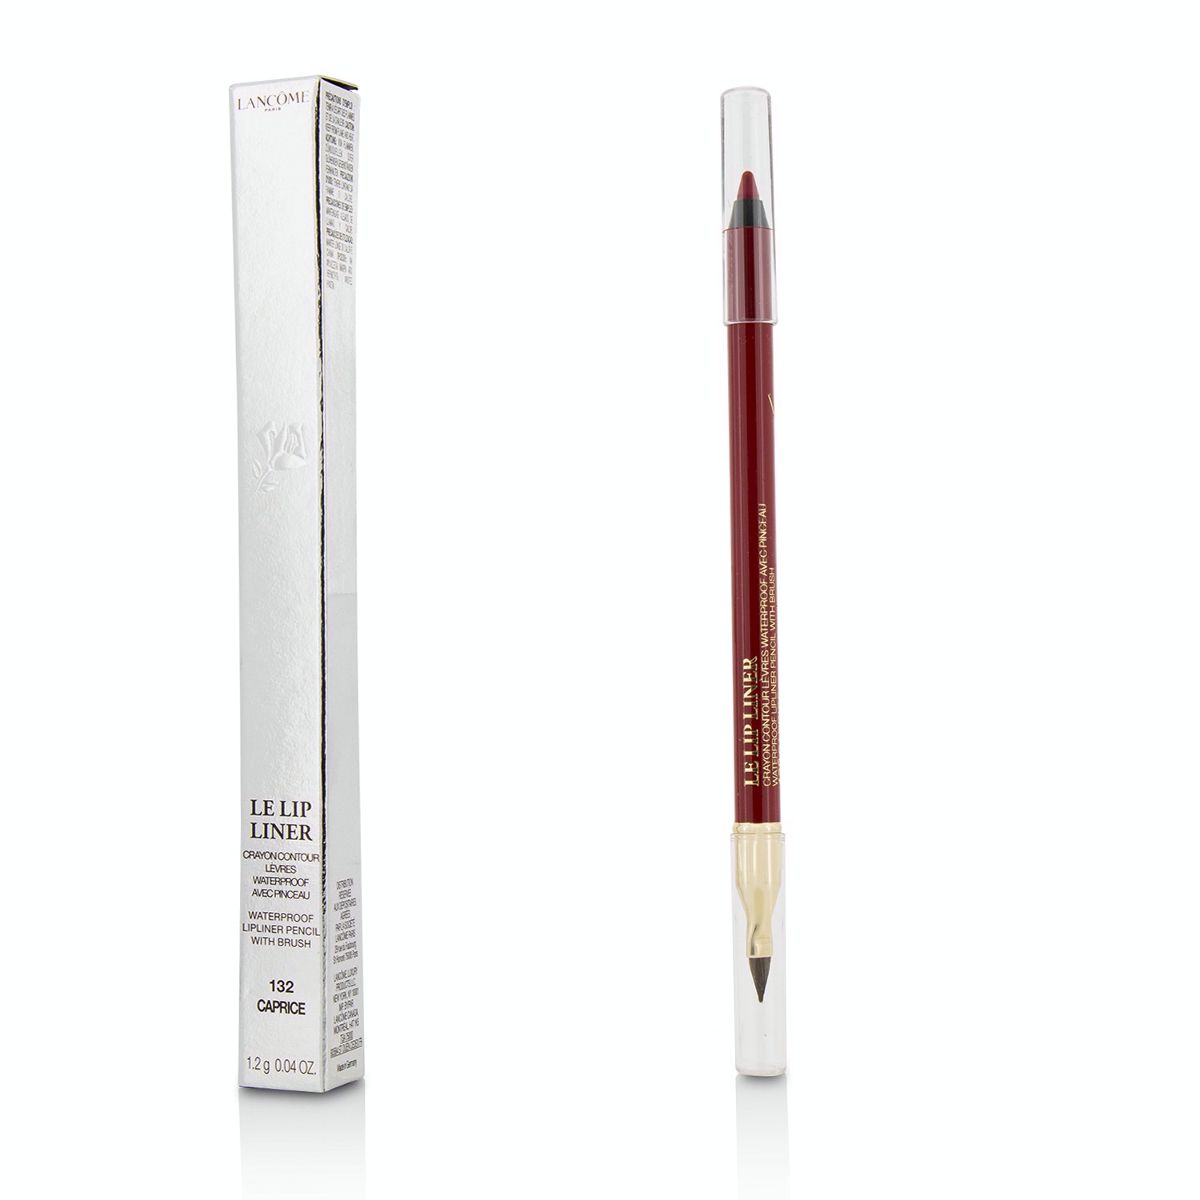 Le Lip Liner Waterproof Lip Pencil With Brush - #132 Caprice Lancome Image